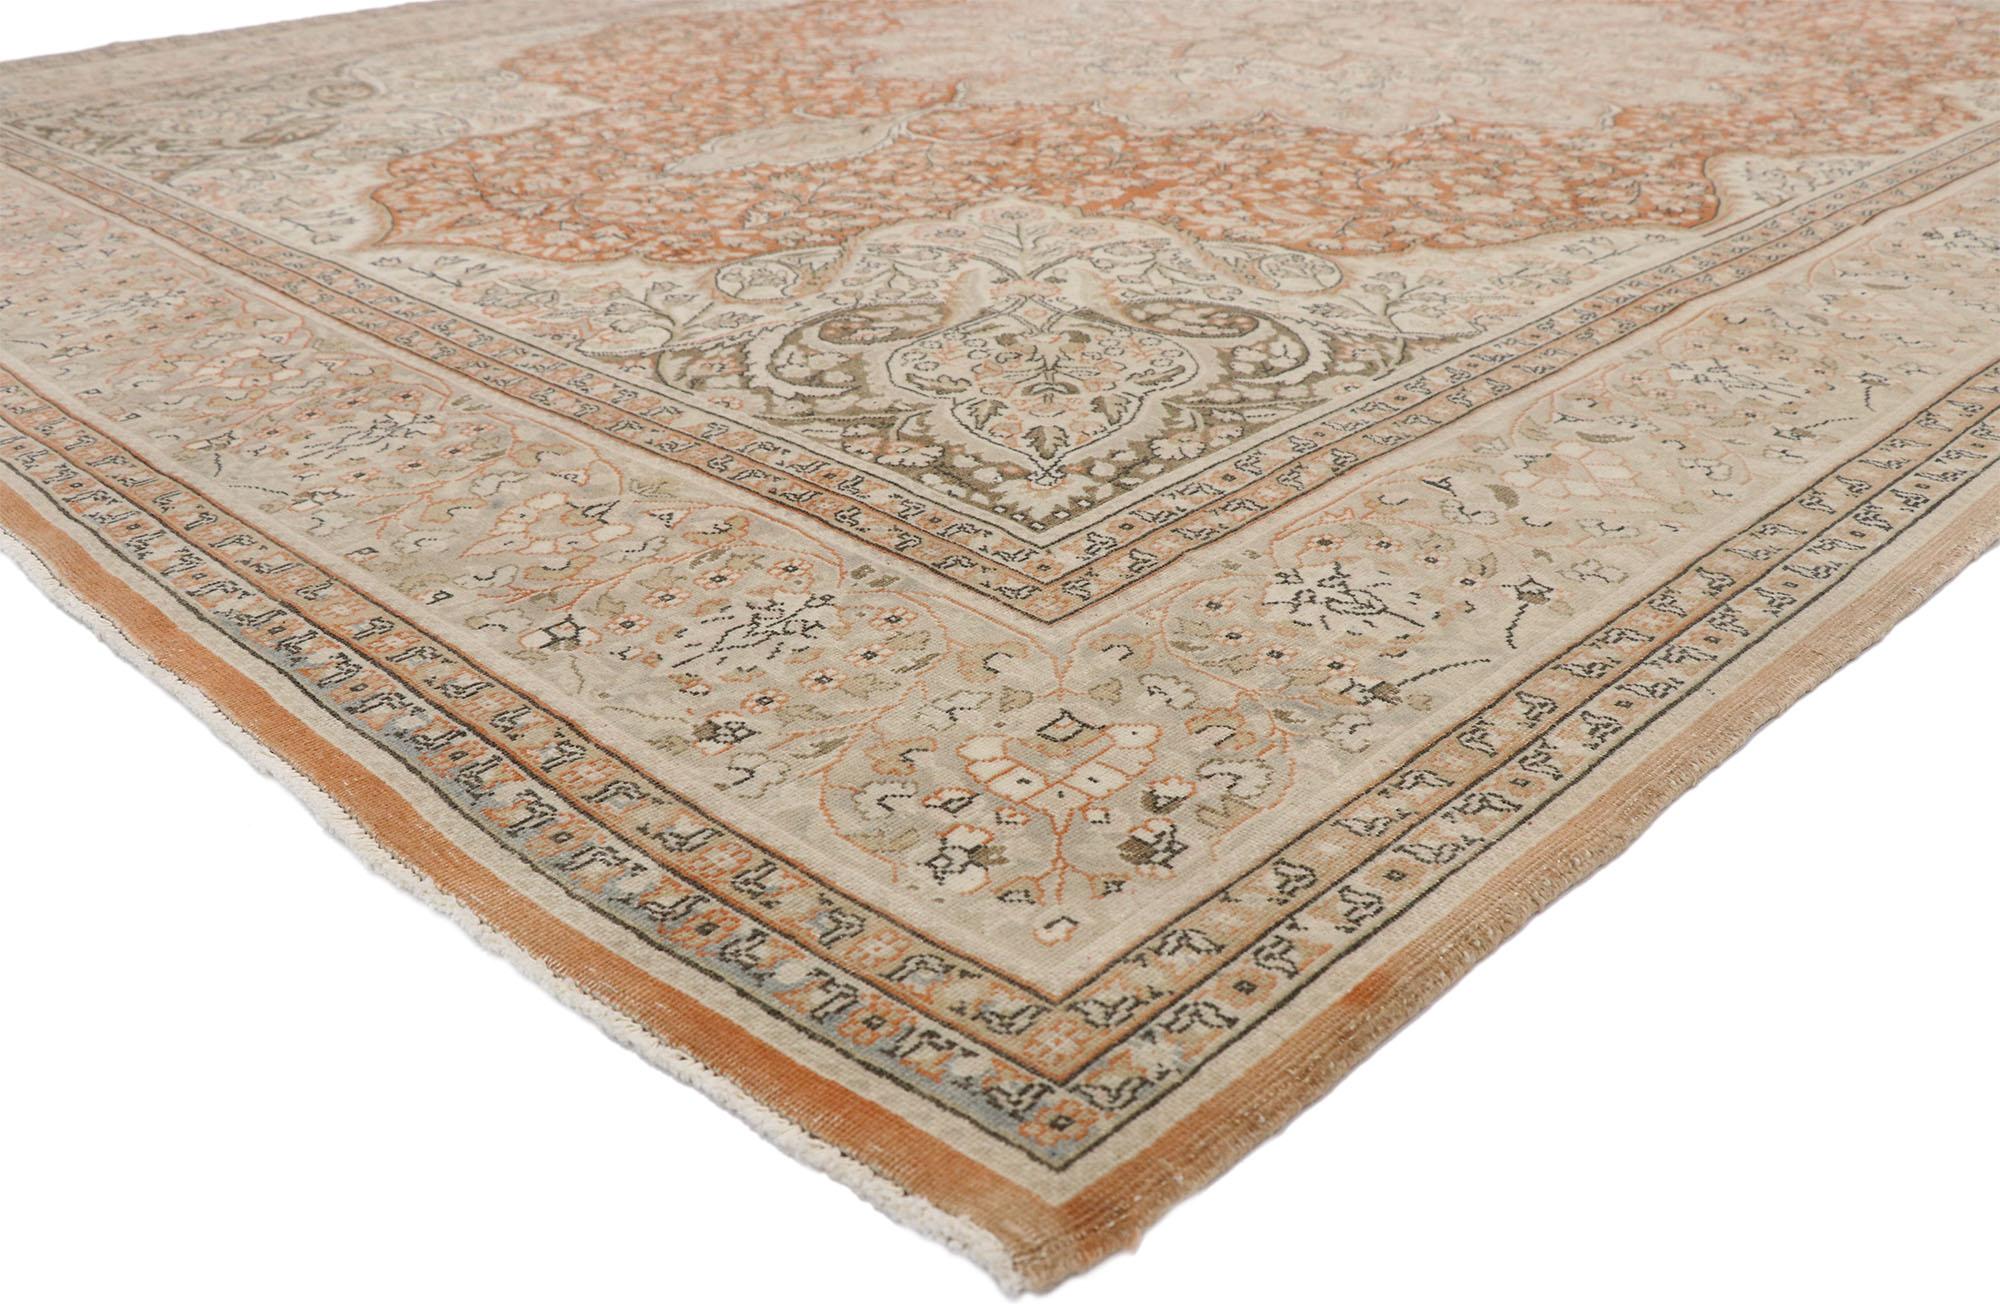 52651, distressed vintage Turkish Sivas rug with Romantic Rustic Art Nouveau style. Balancing a timeless design with a romantic rustic sensibility, this hand knotted wool distressed vintage Turkish Sivas rug beautifully embodies Art Nouveau style. A